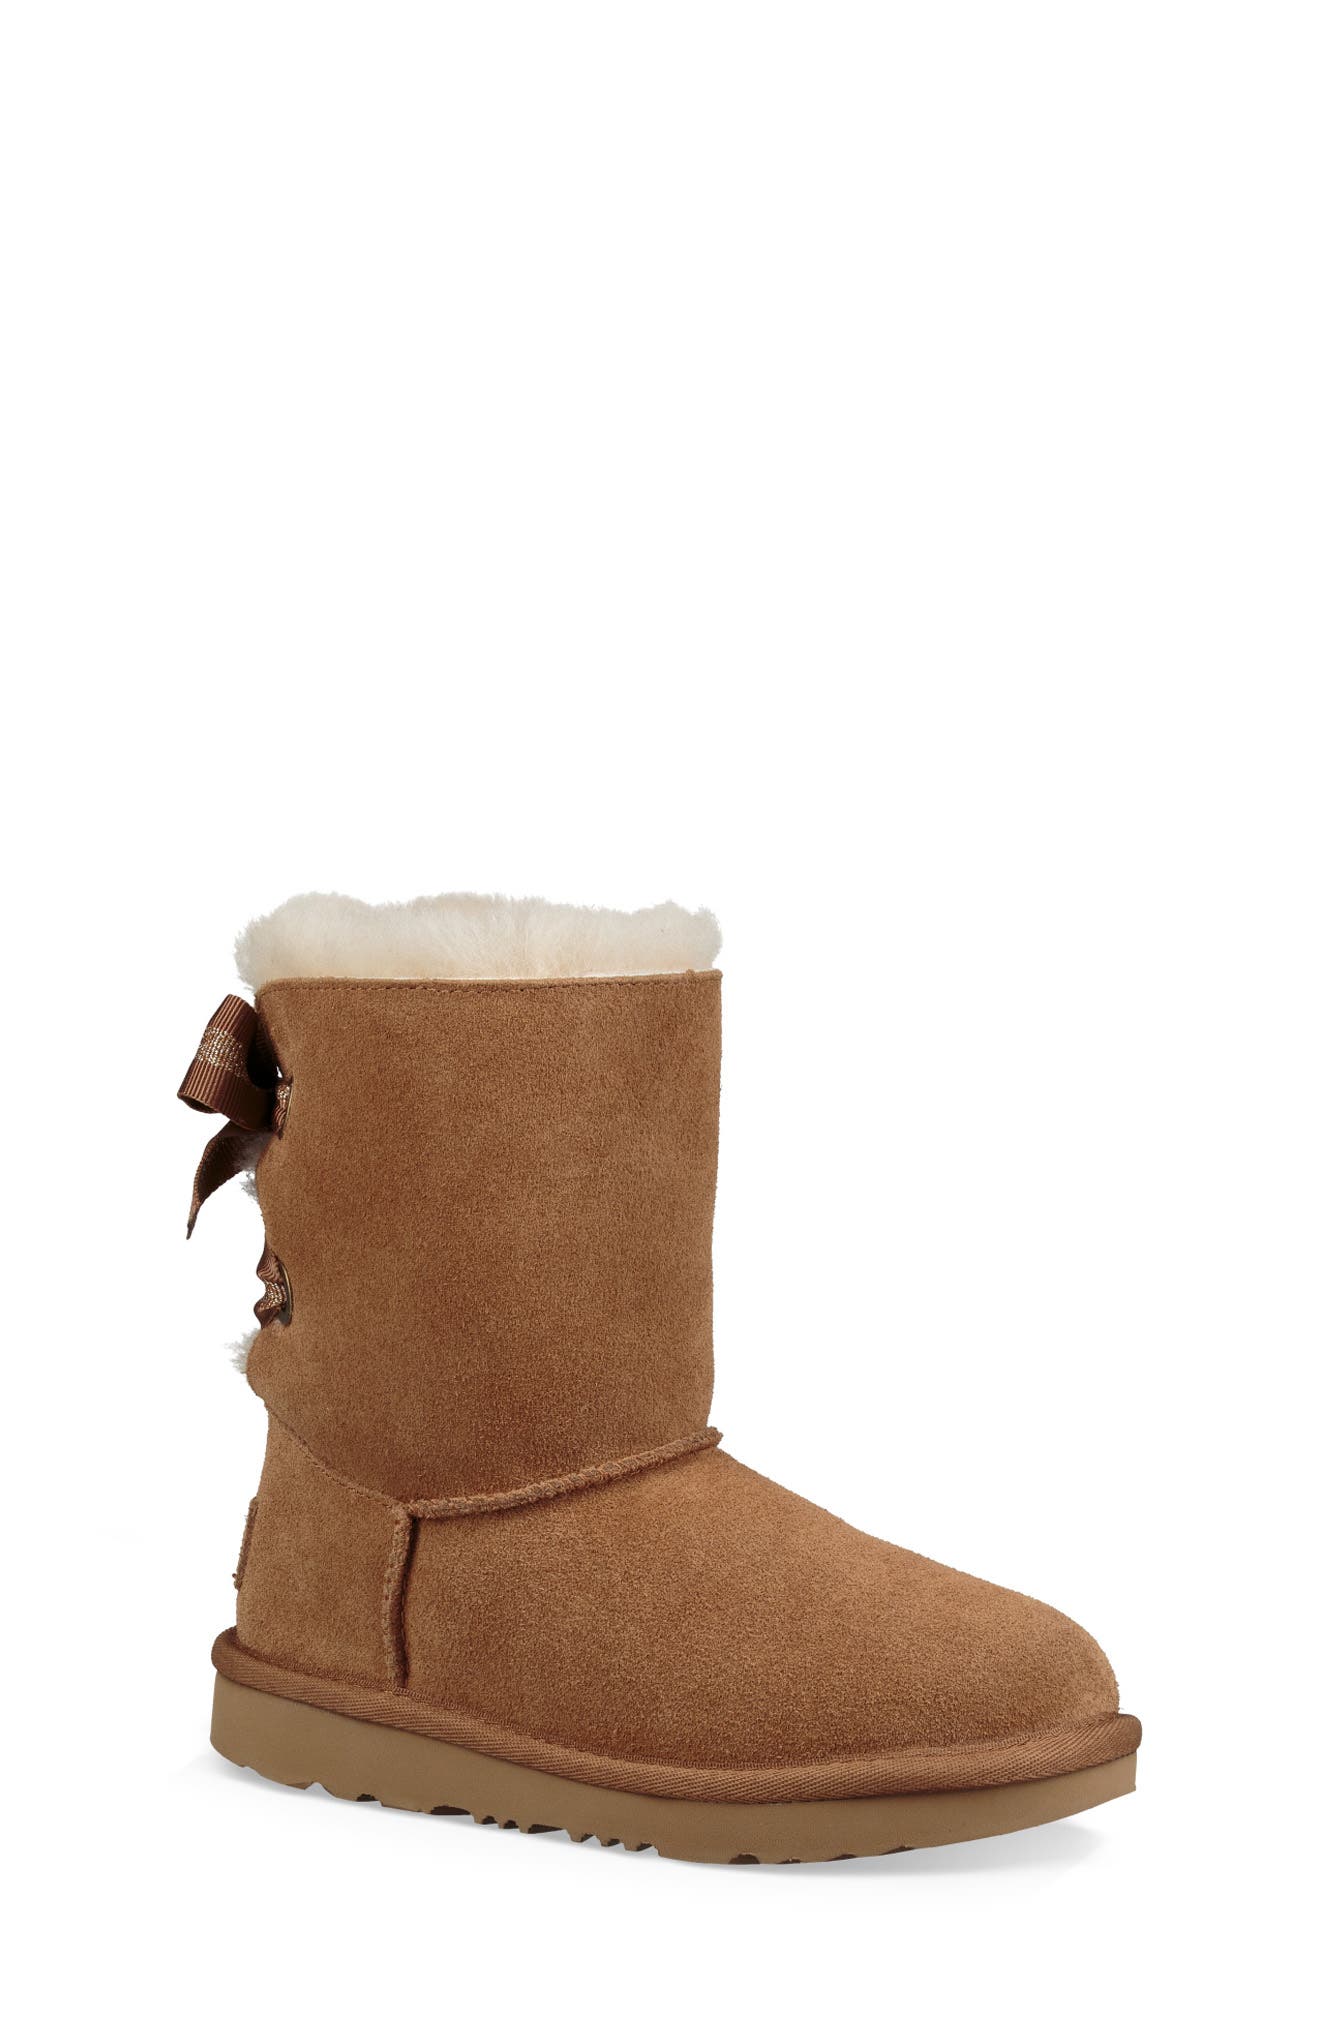 customized uggs nordstrom